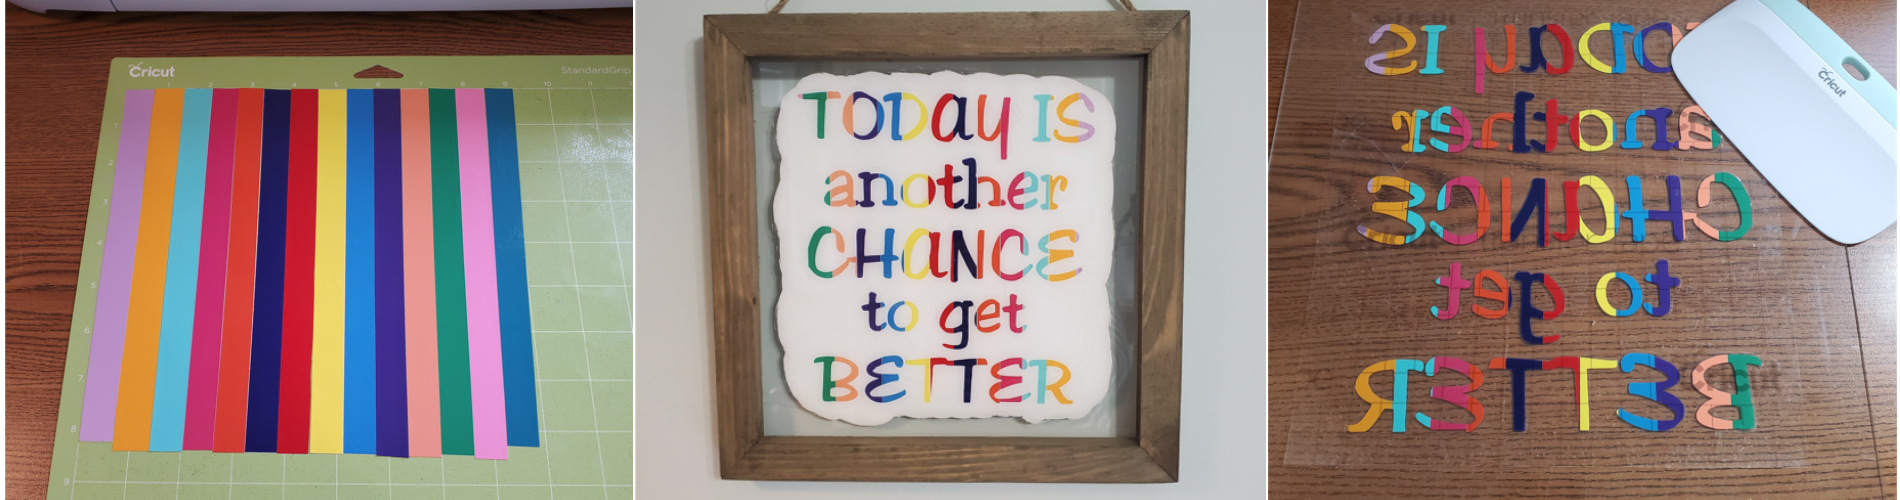 How to Cut Bulletin Board Letters with Cricut® - A Perfect Blend